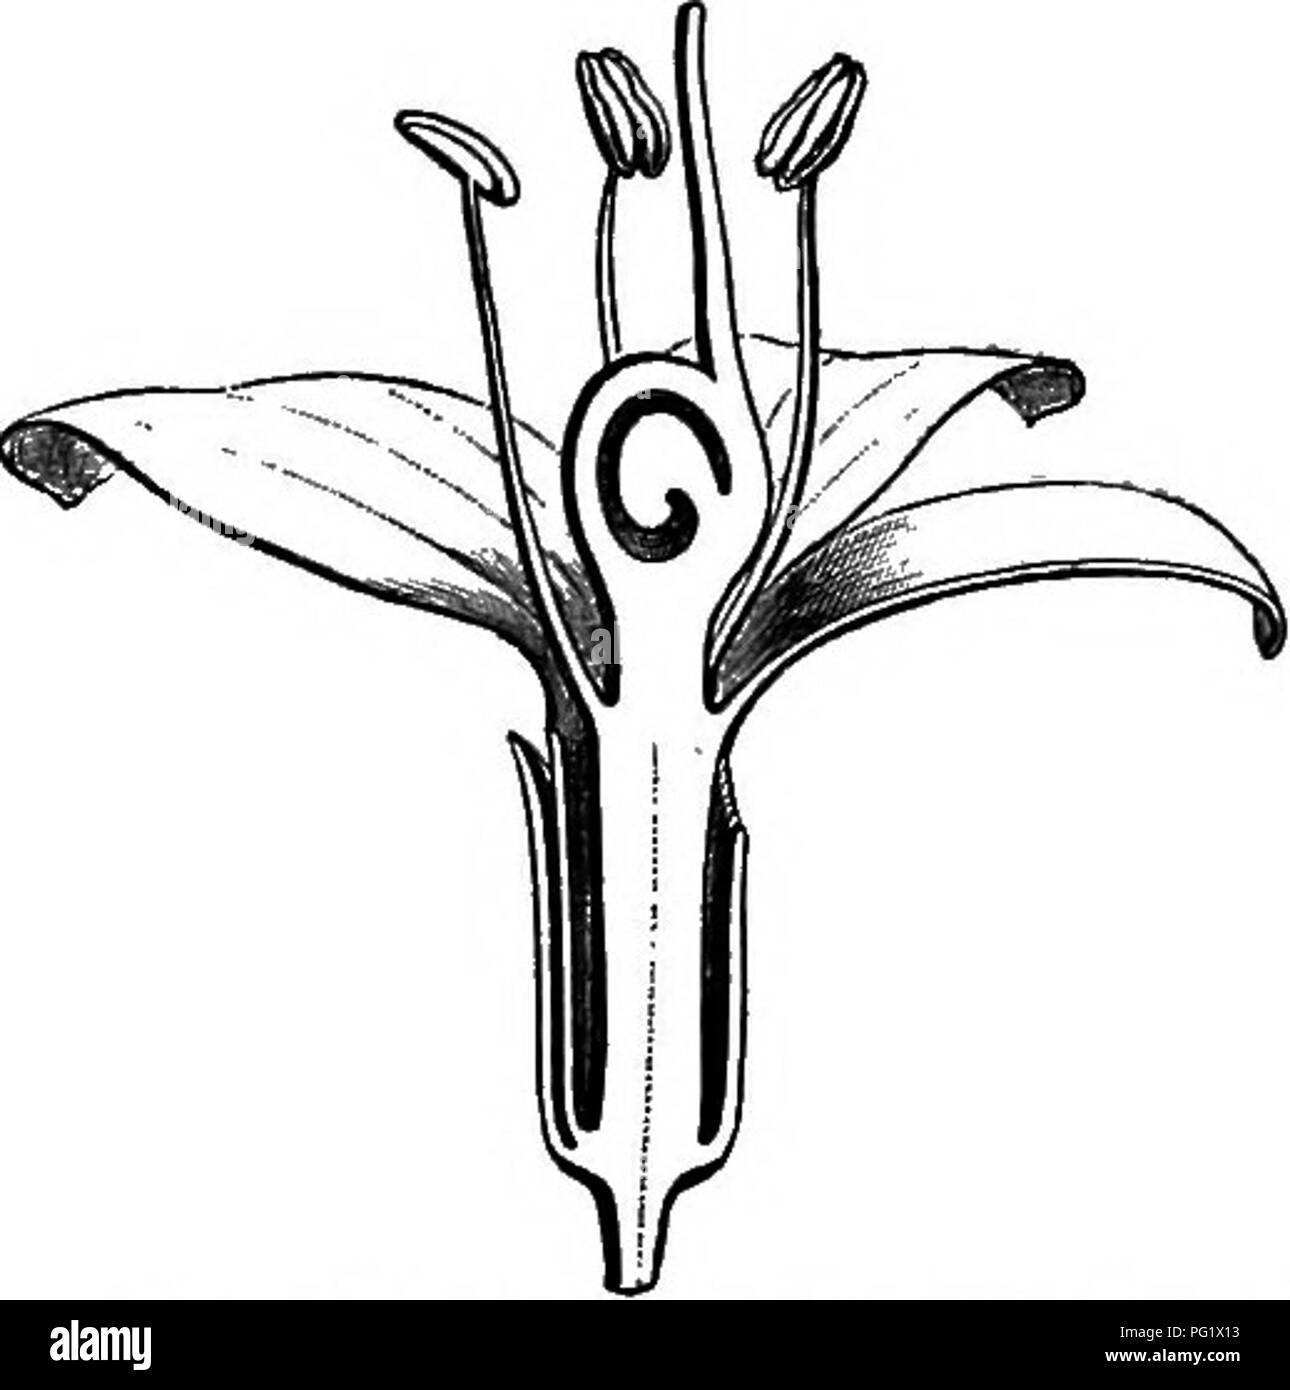 . The natural history of plants. Botany. Fig. 304. Hermaphrodite Fig. 307. Hermaphrodite flower, Fig. 306. Longitudinal section of flower (f). the perianth removed. hermaphrodite flower. fruit. They are trees and shrubs, sometimes climbing, with impari- pimiate leaves, having 4- or 5-merous flowers, which have been ob- served in all tropical regions of the globe, except Australia.^ Gluta (fig. 804-807) has very nearly the same organisation ' We can only douhtfully place near Tapi- rira, Stematostaphis Surteri, a small tree from western tropical Africa, with compound impari- pinnate leaves, who Stock Photo